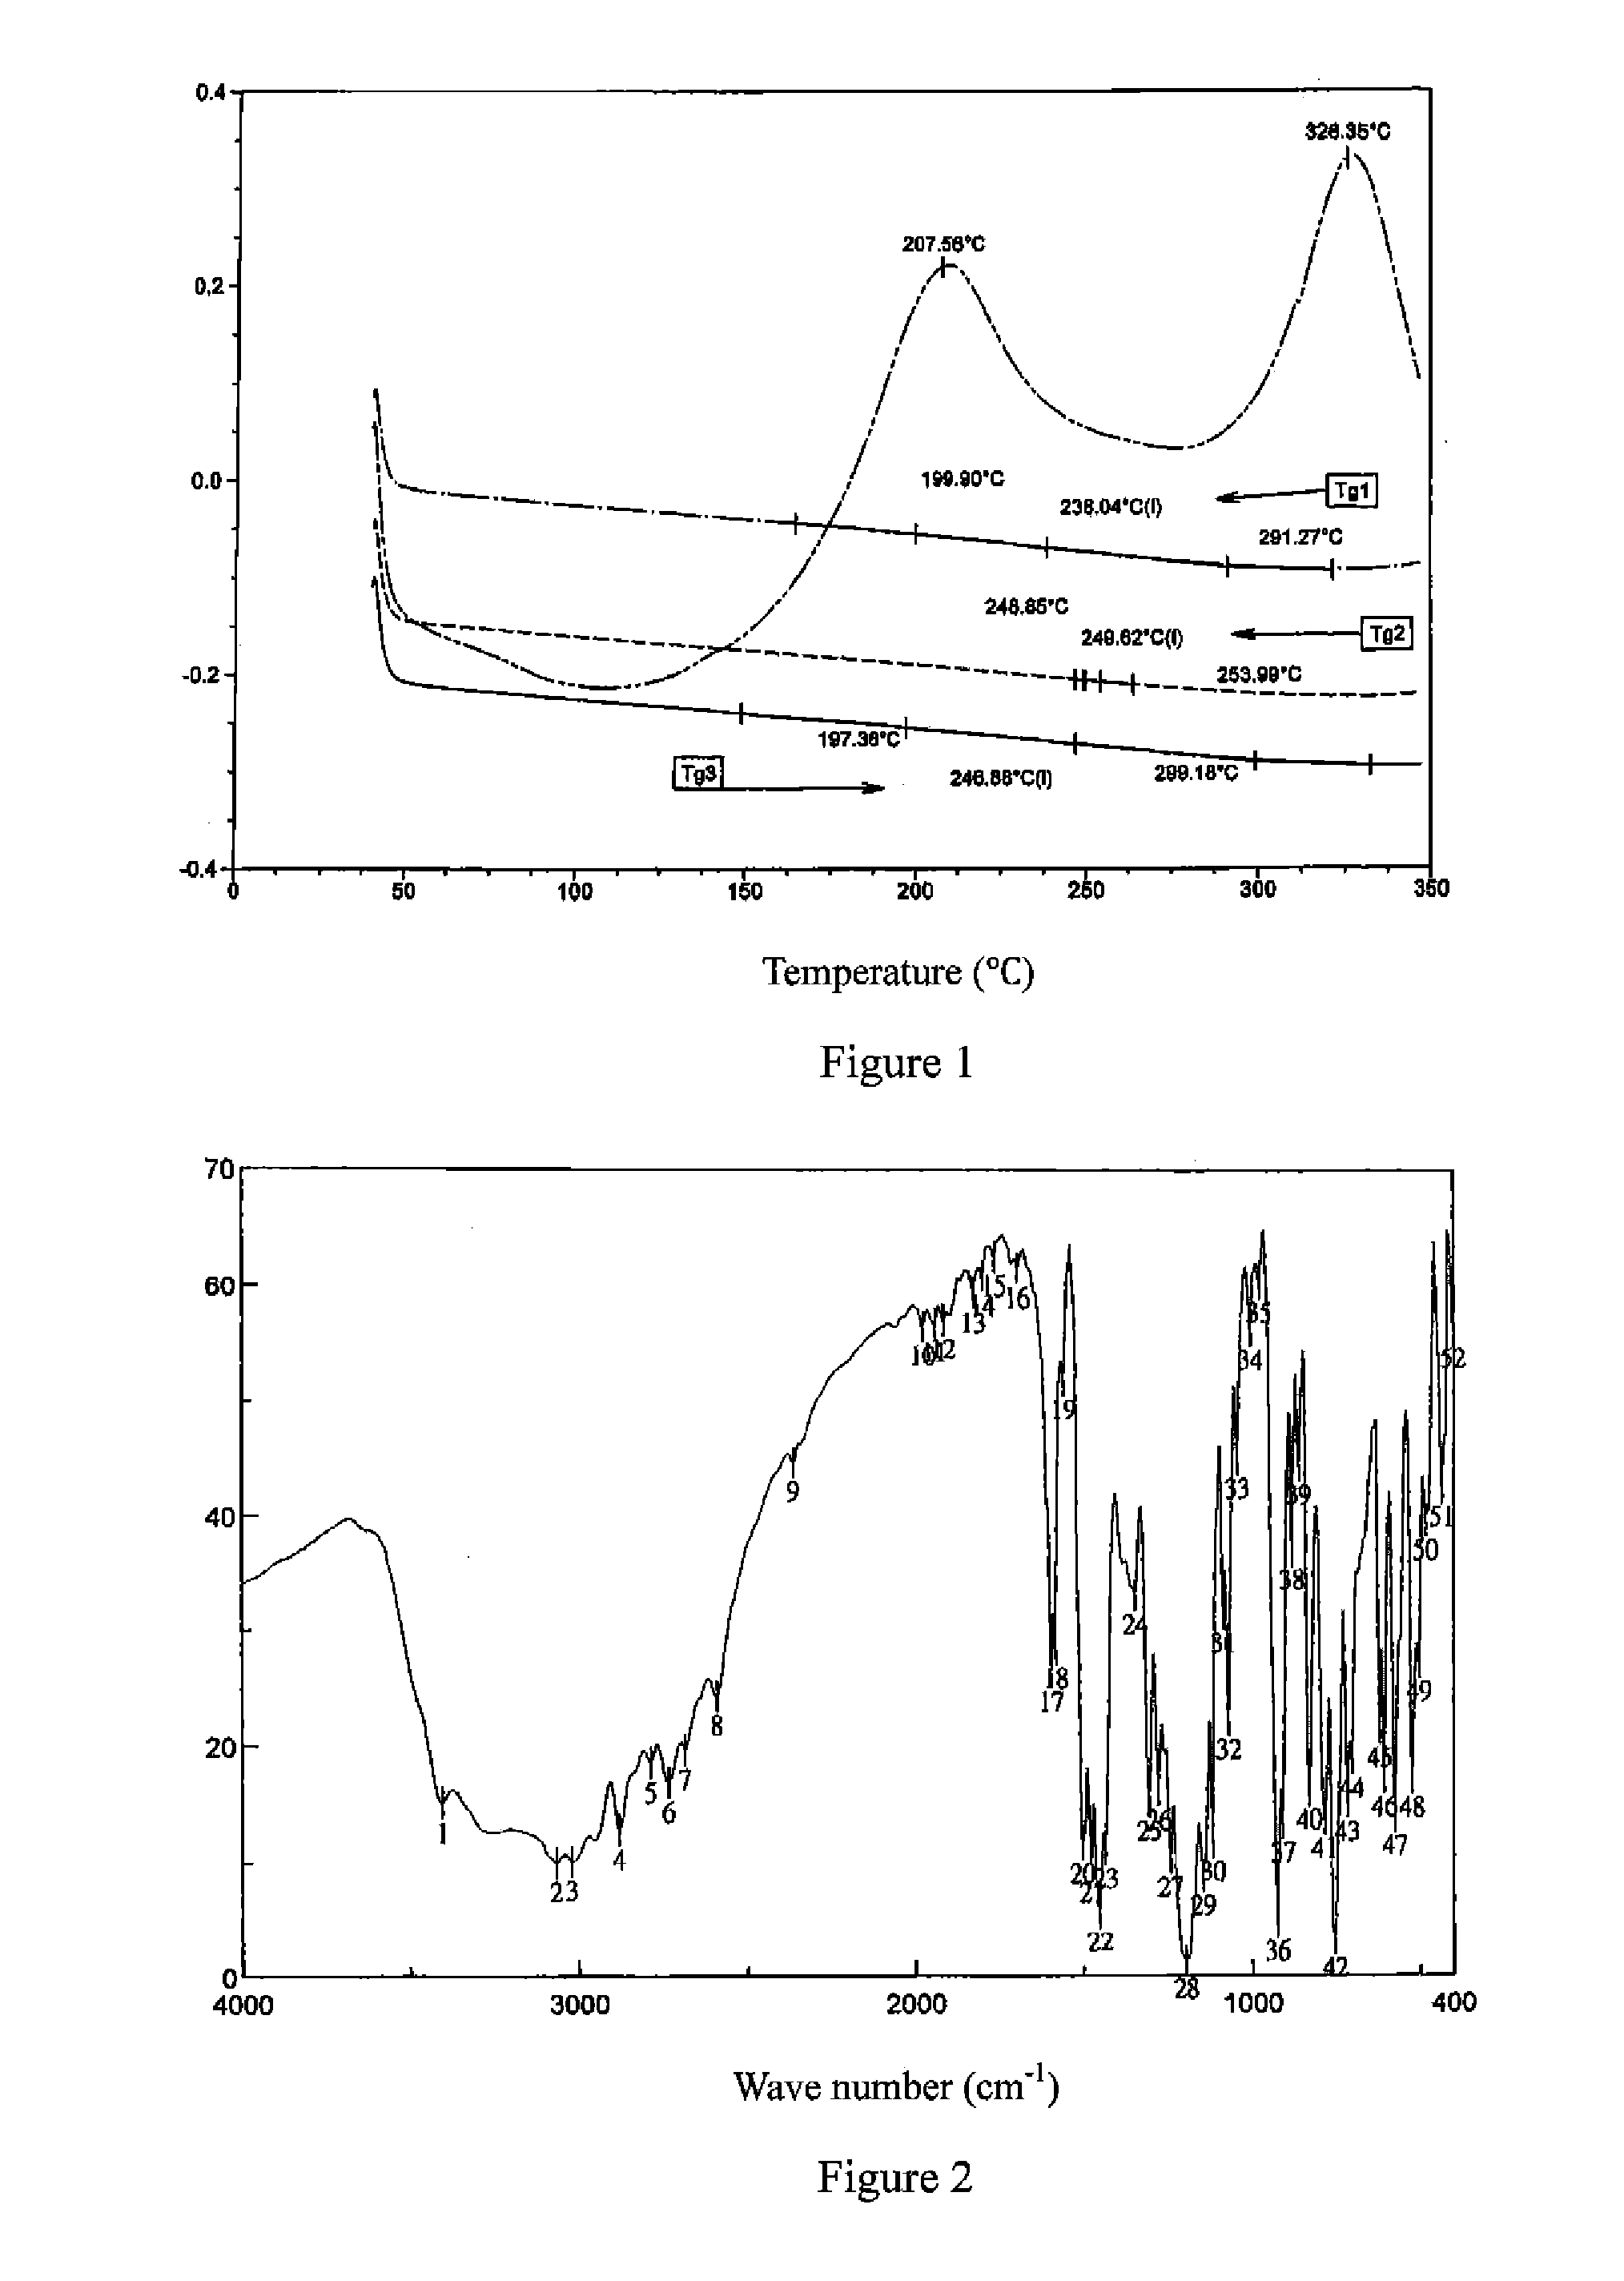 Vinylbenzyl-etherified-dopo compound resin composition and preparation and application thereof